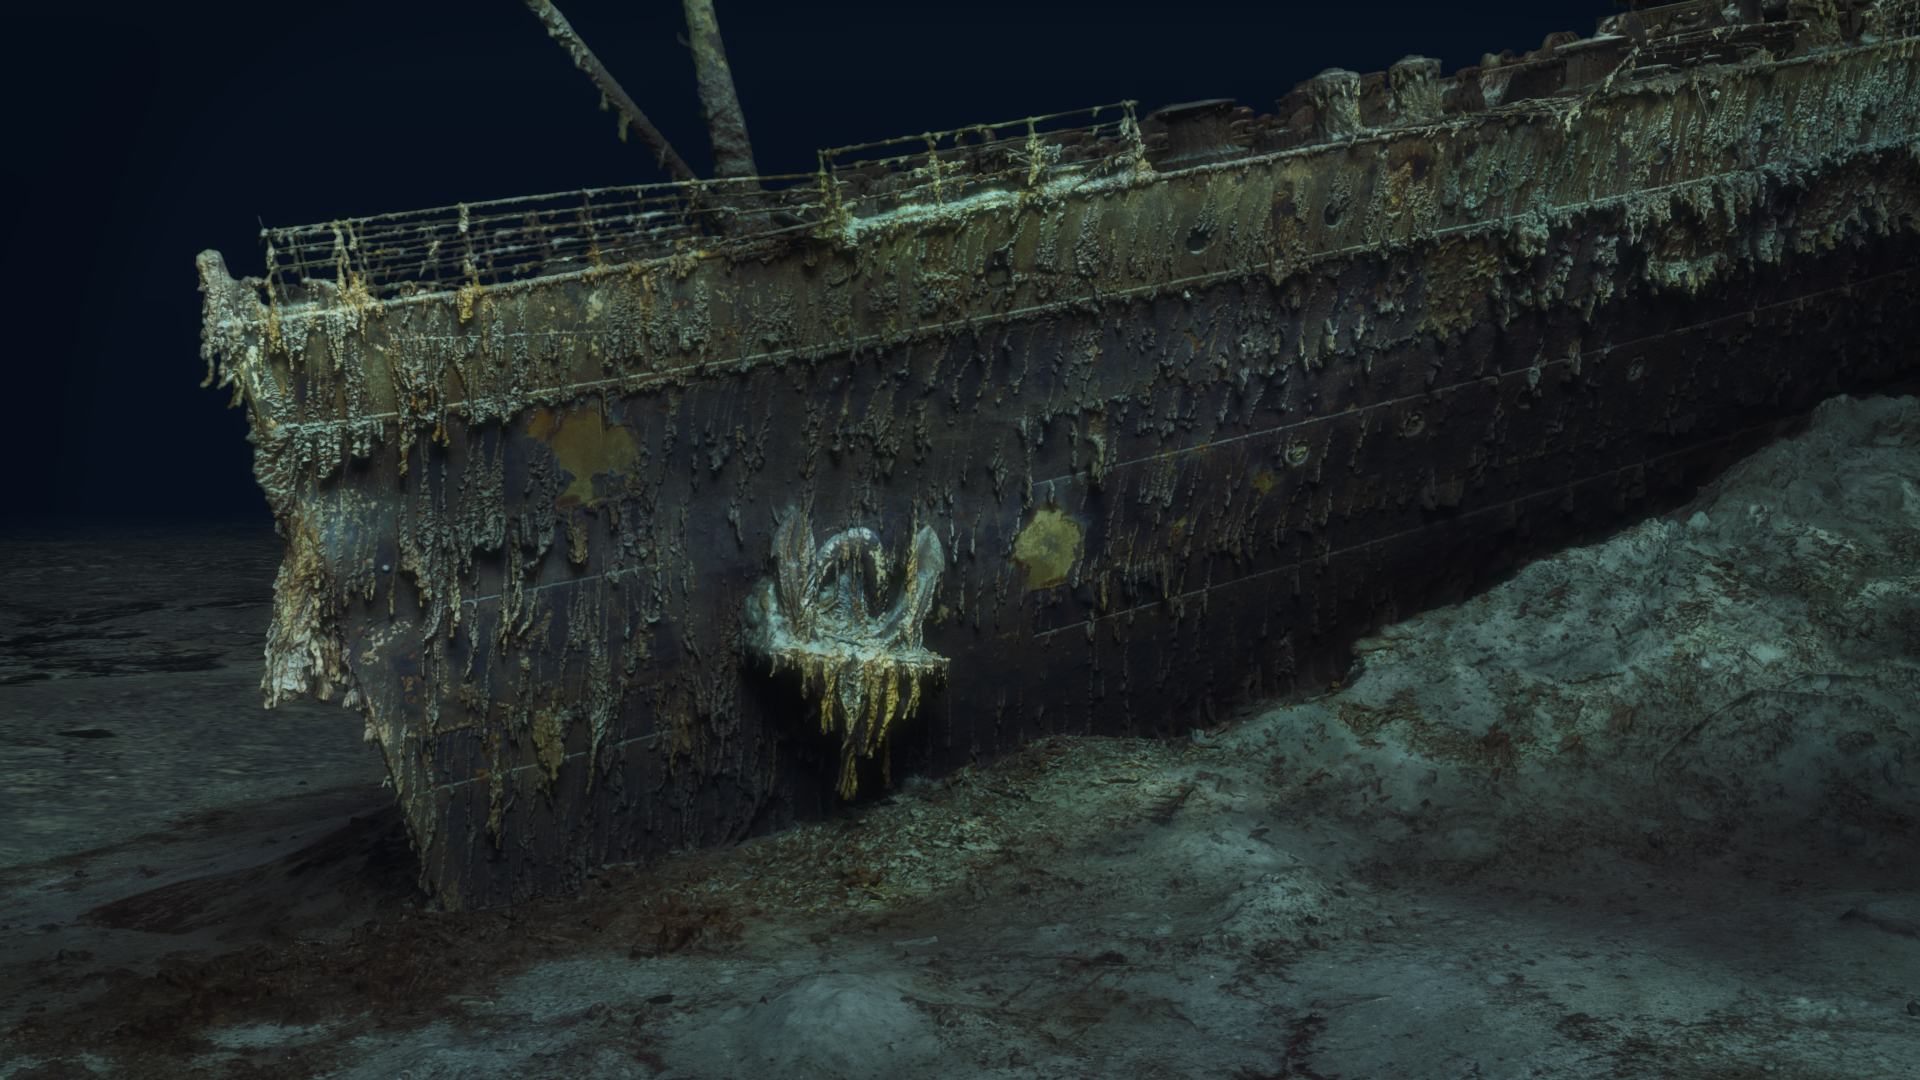 Titanic shipwreck captured in first full-sized 3D scan - PICTURE